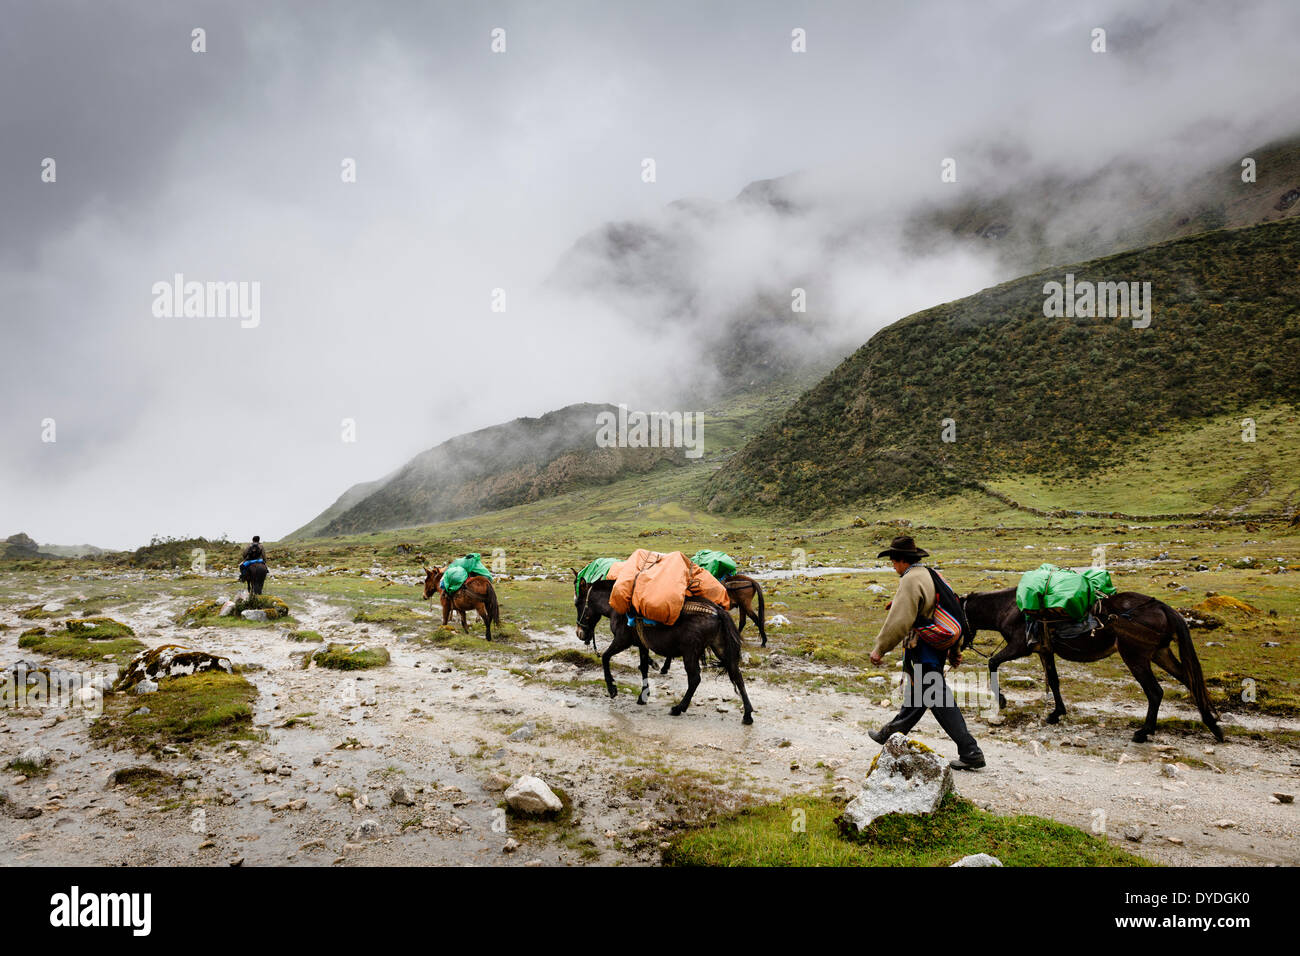 Local horsemen with their mules in the Cuzco Region of Peru. Stock Photo